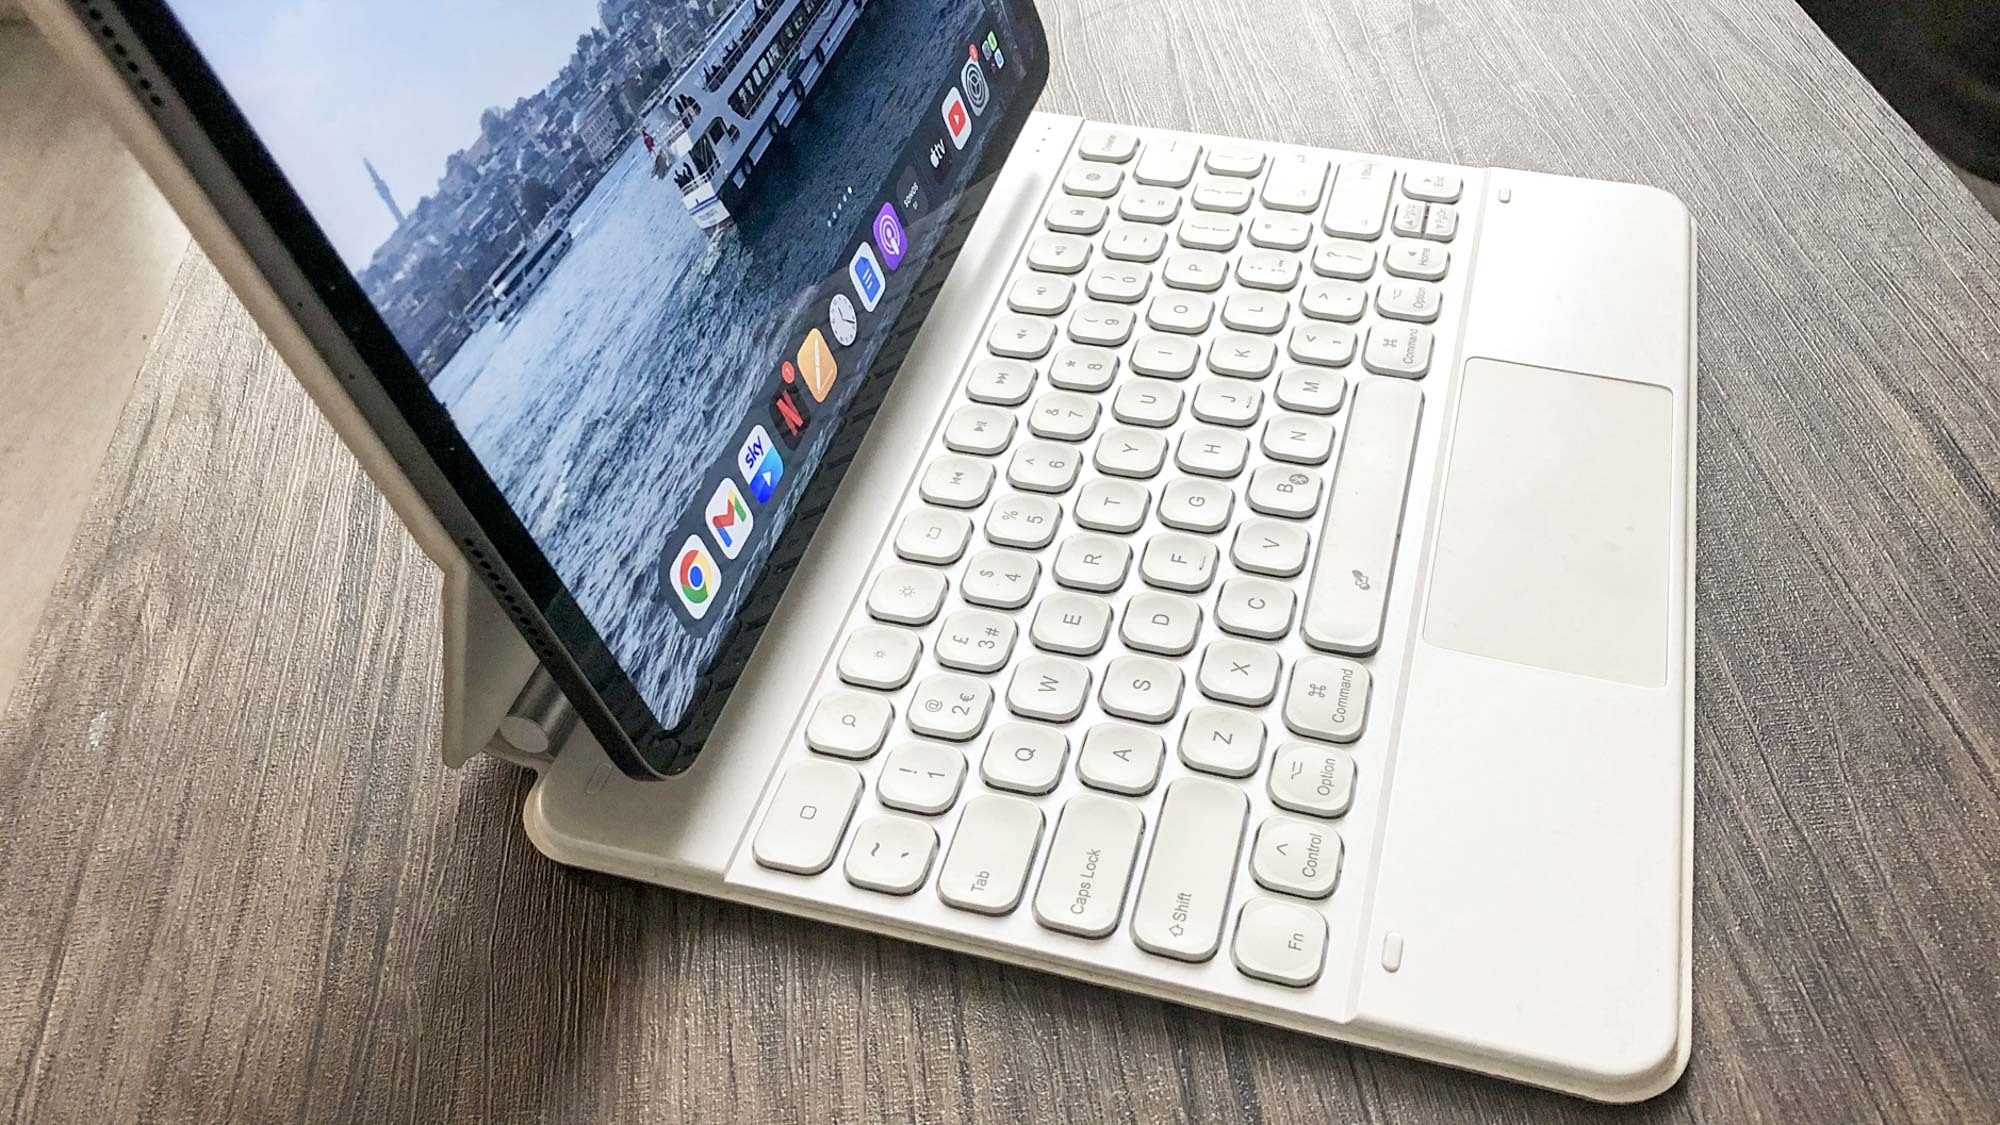 Logitech's iPad Pro keyboard case is relatively affordable